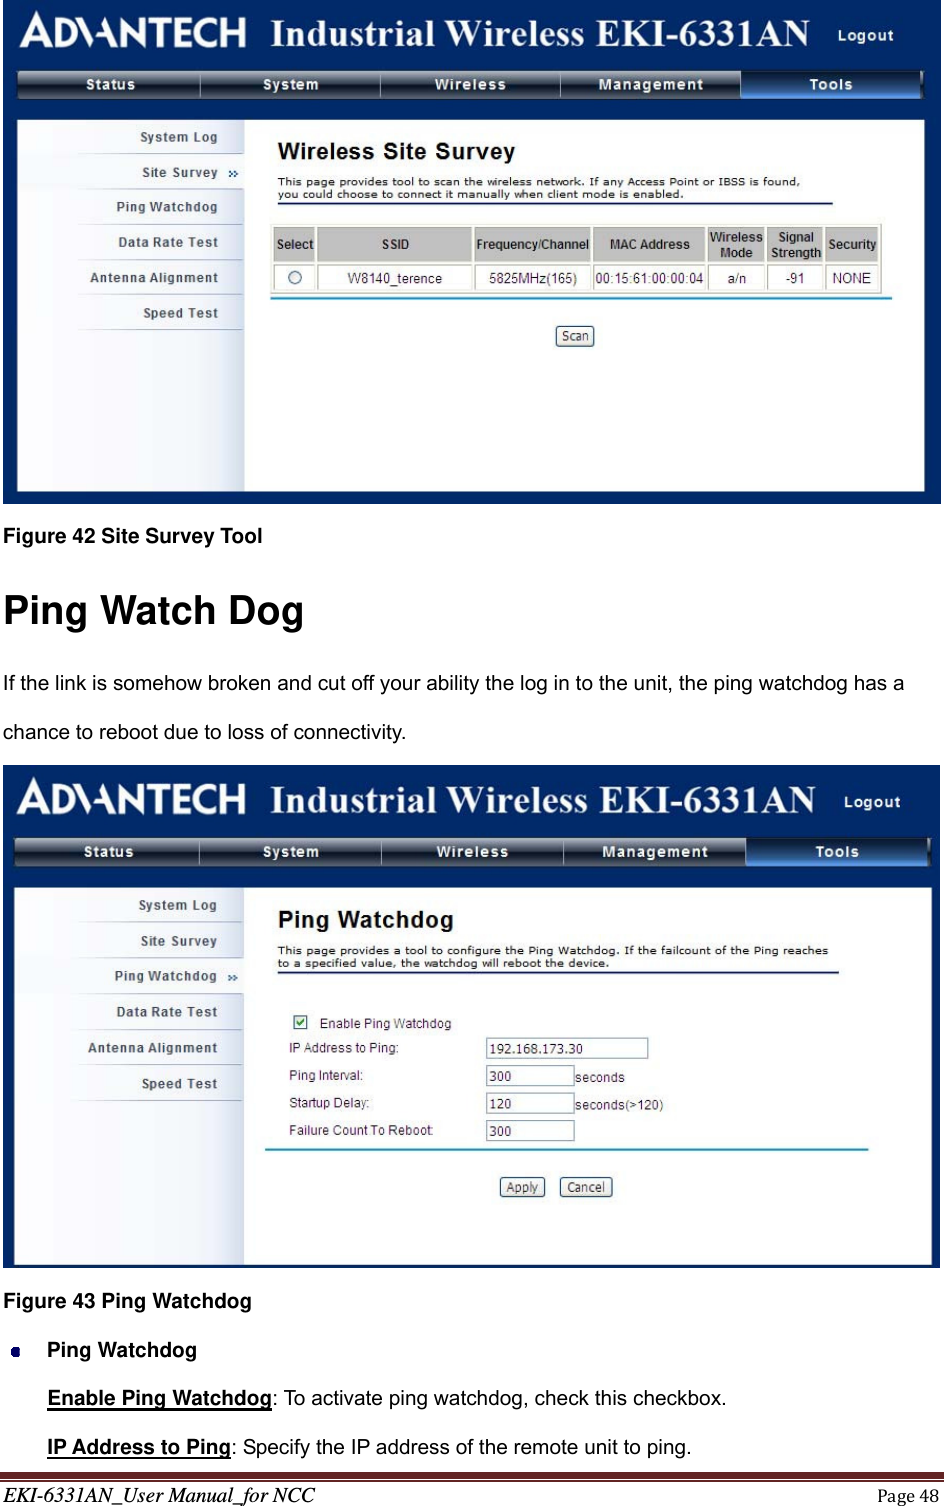 EKI-6331AN_User Manual_for NCCPage48 Figure 42 Site Survey Tool Ping Watch Dog If the link is somehow broken and cut off your ability the log in to the unit, the ping watchdog has a chance to reboot due to loss of connectivity.  Figure 43 Ping Watchdog  Ping Watchdog Enable Ping Watchdog: To activate ping watchdog, check this checkbox. IP Address to Ping: Specify the IP address of the remote unit to ping. 